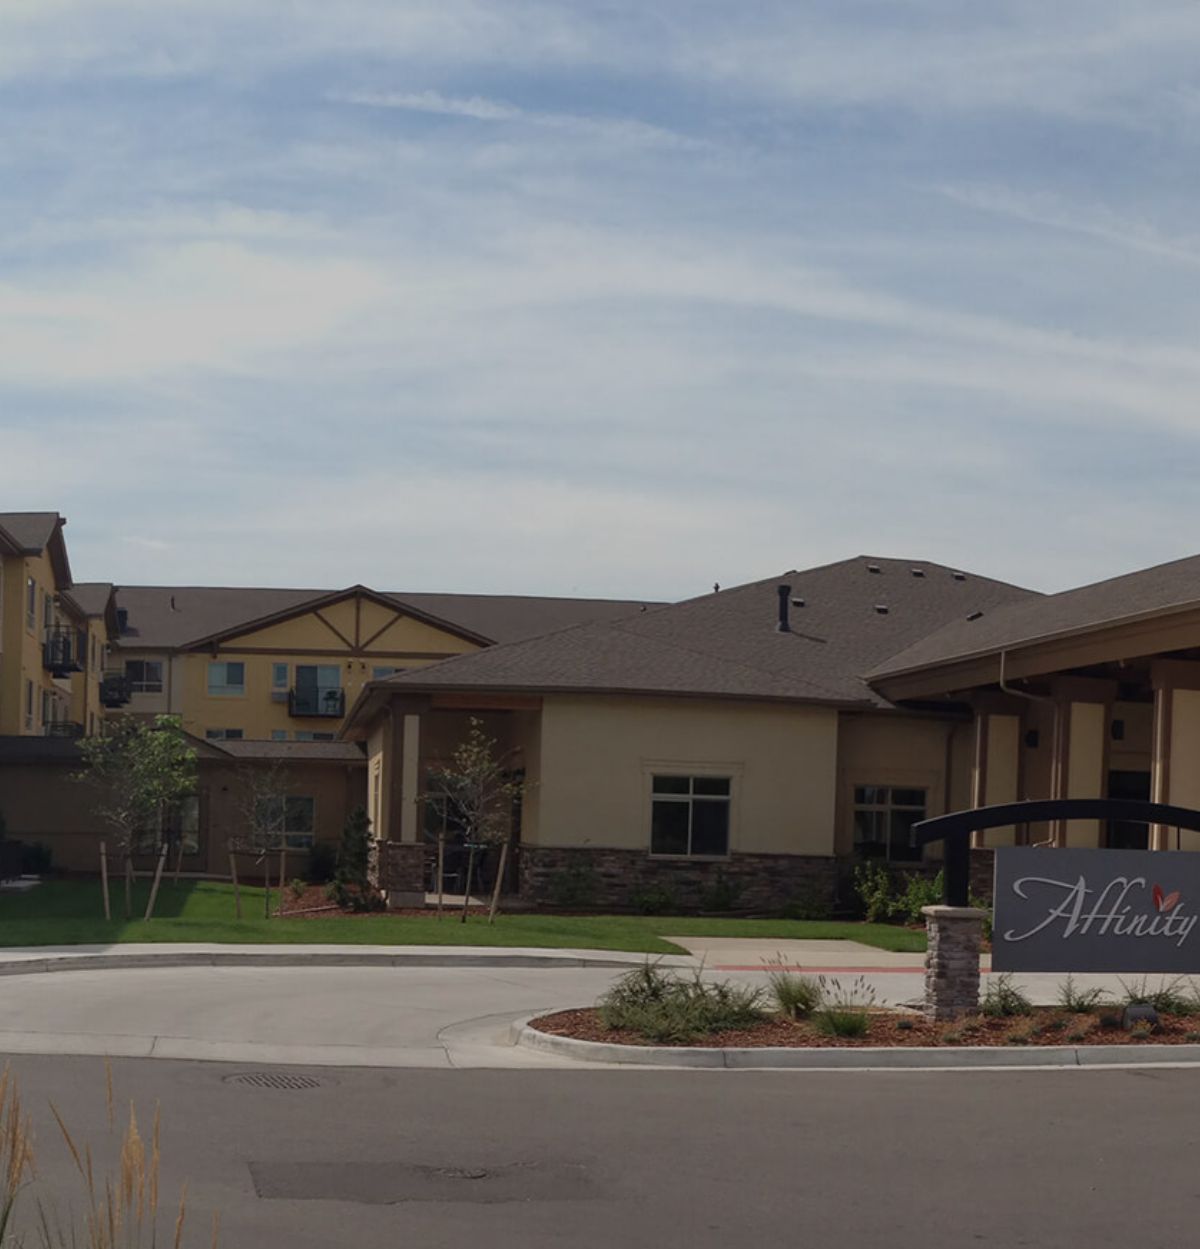 Affinity at Lafayette - Affinity Living Communities